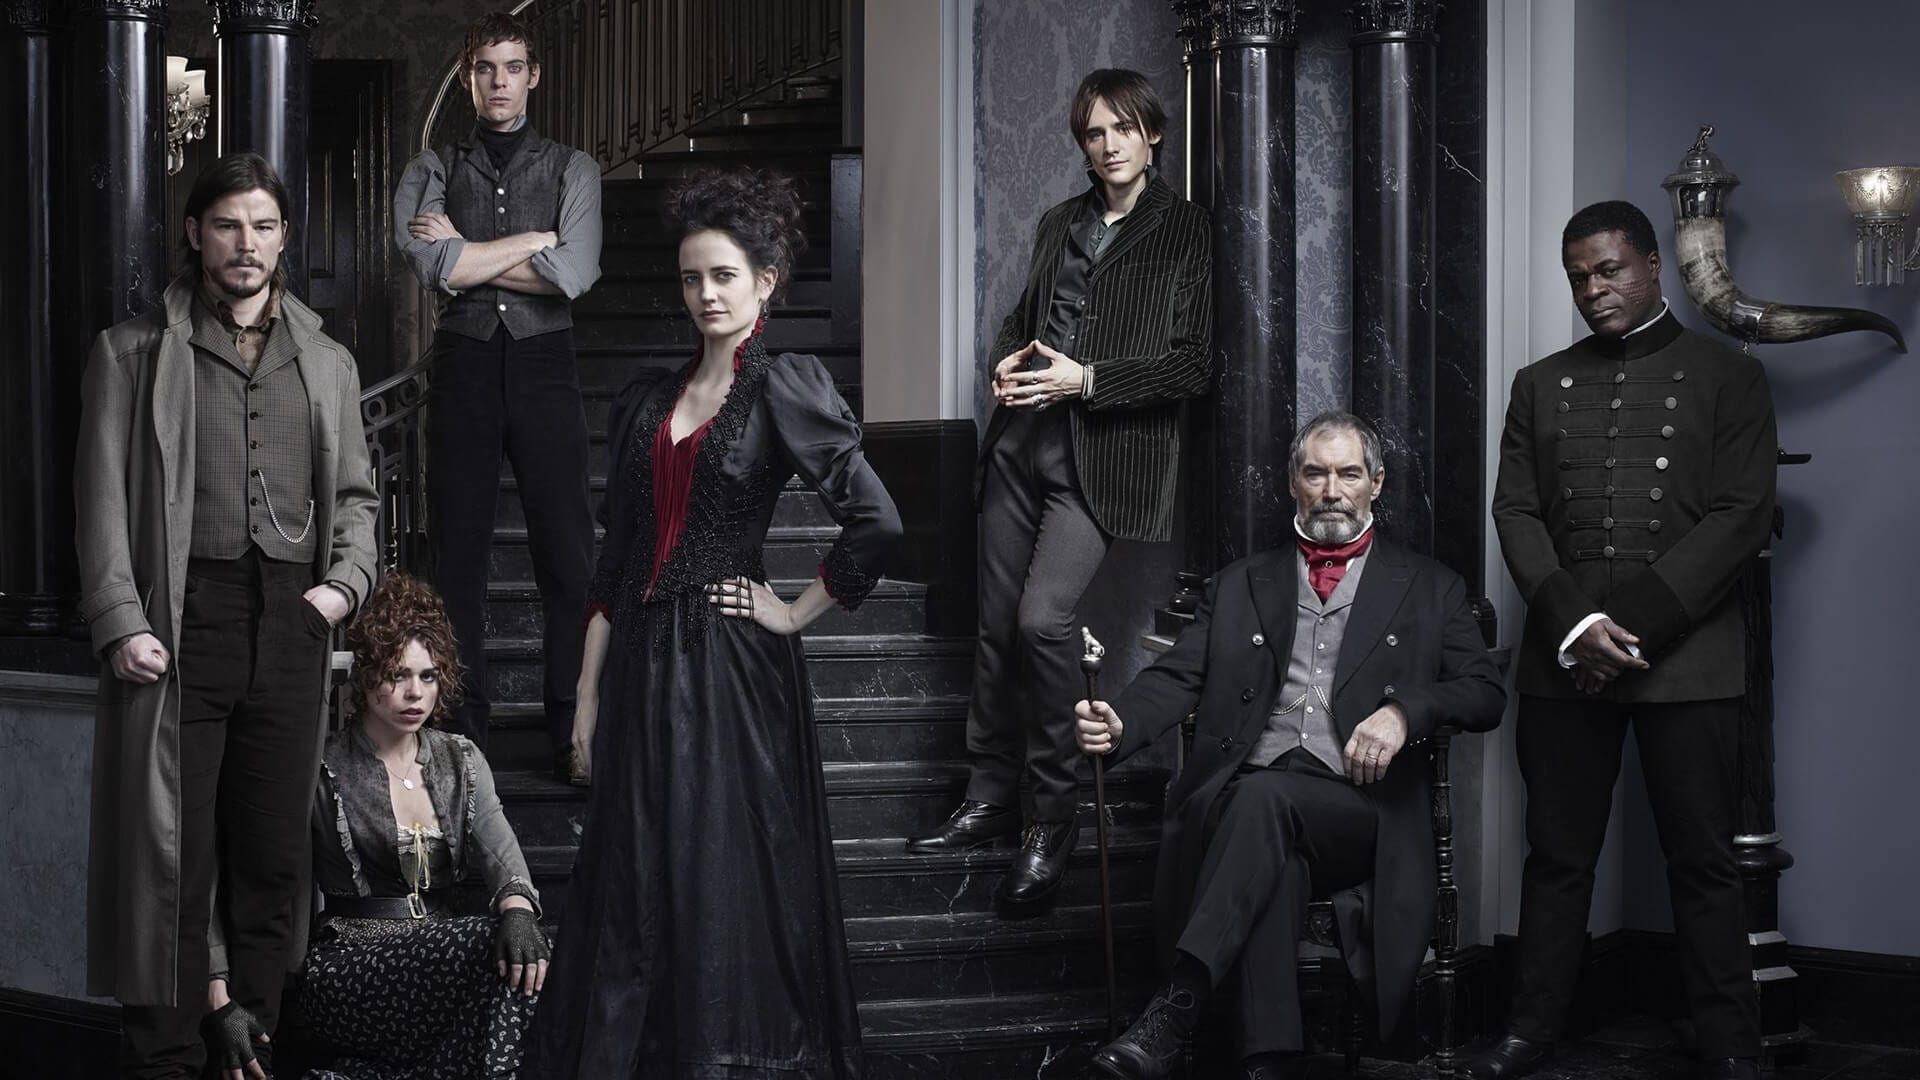 Penny Dreadful, Penny Dreadful spinoff